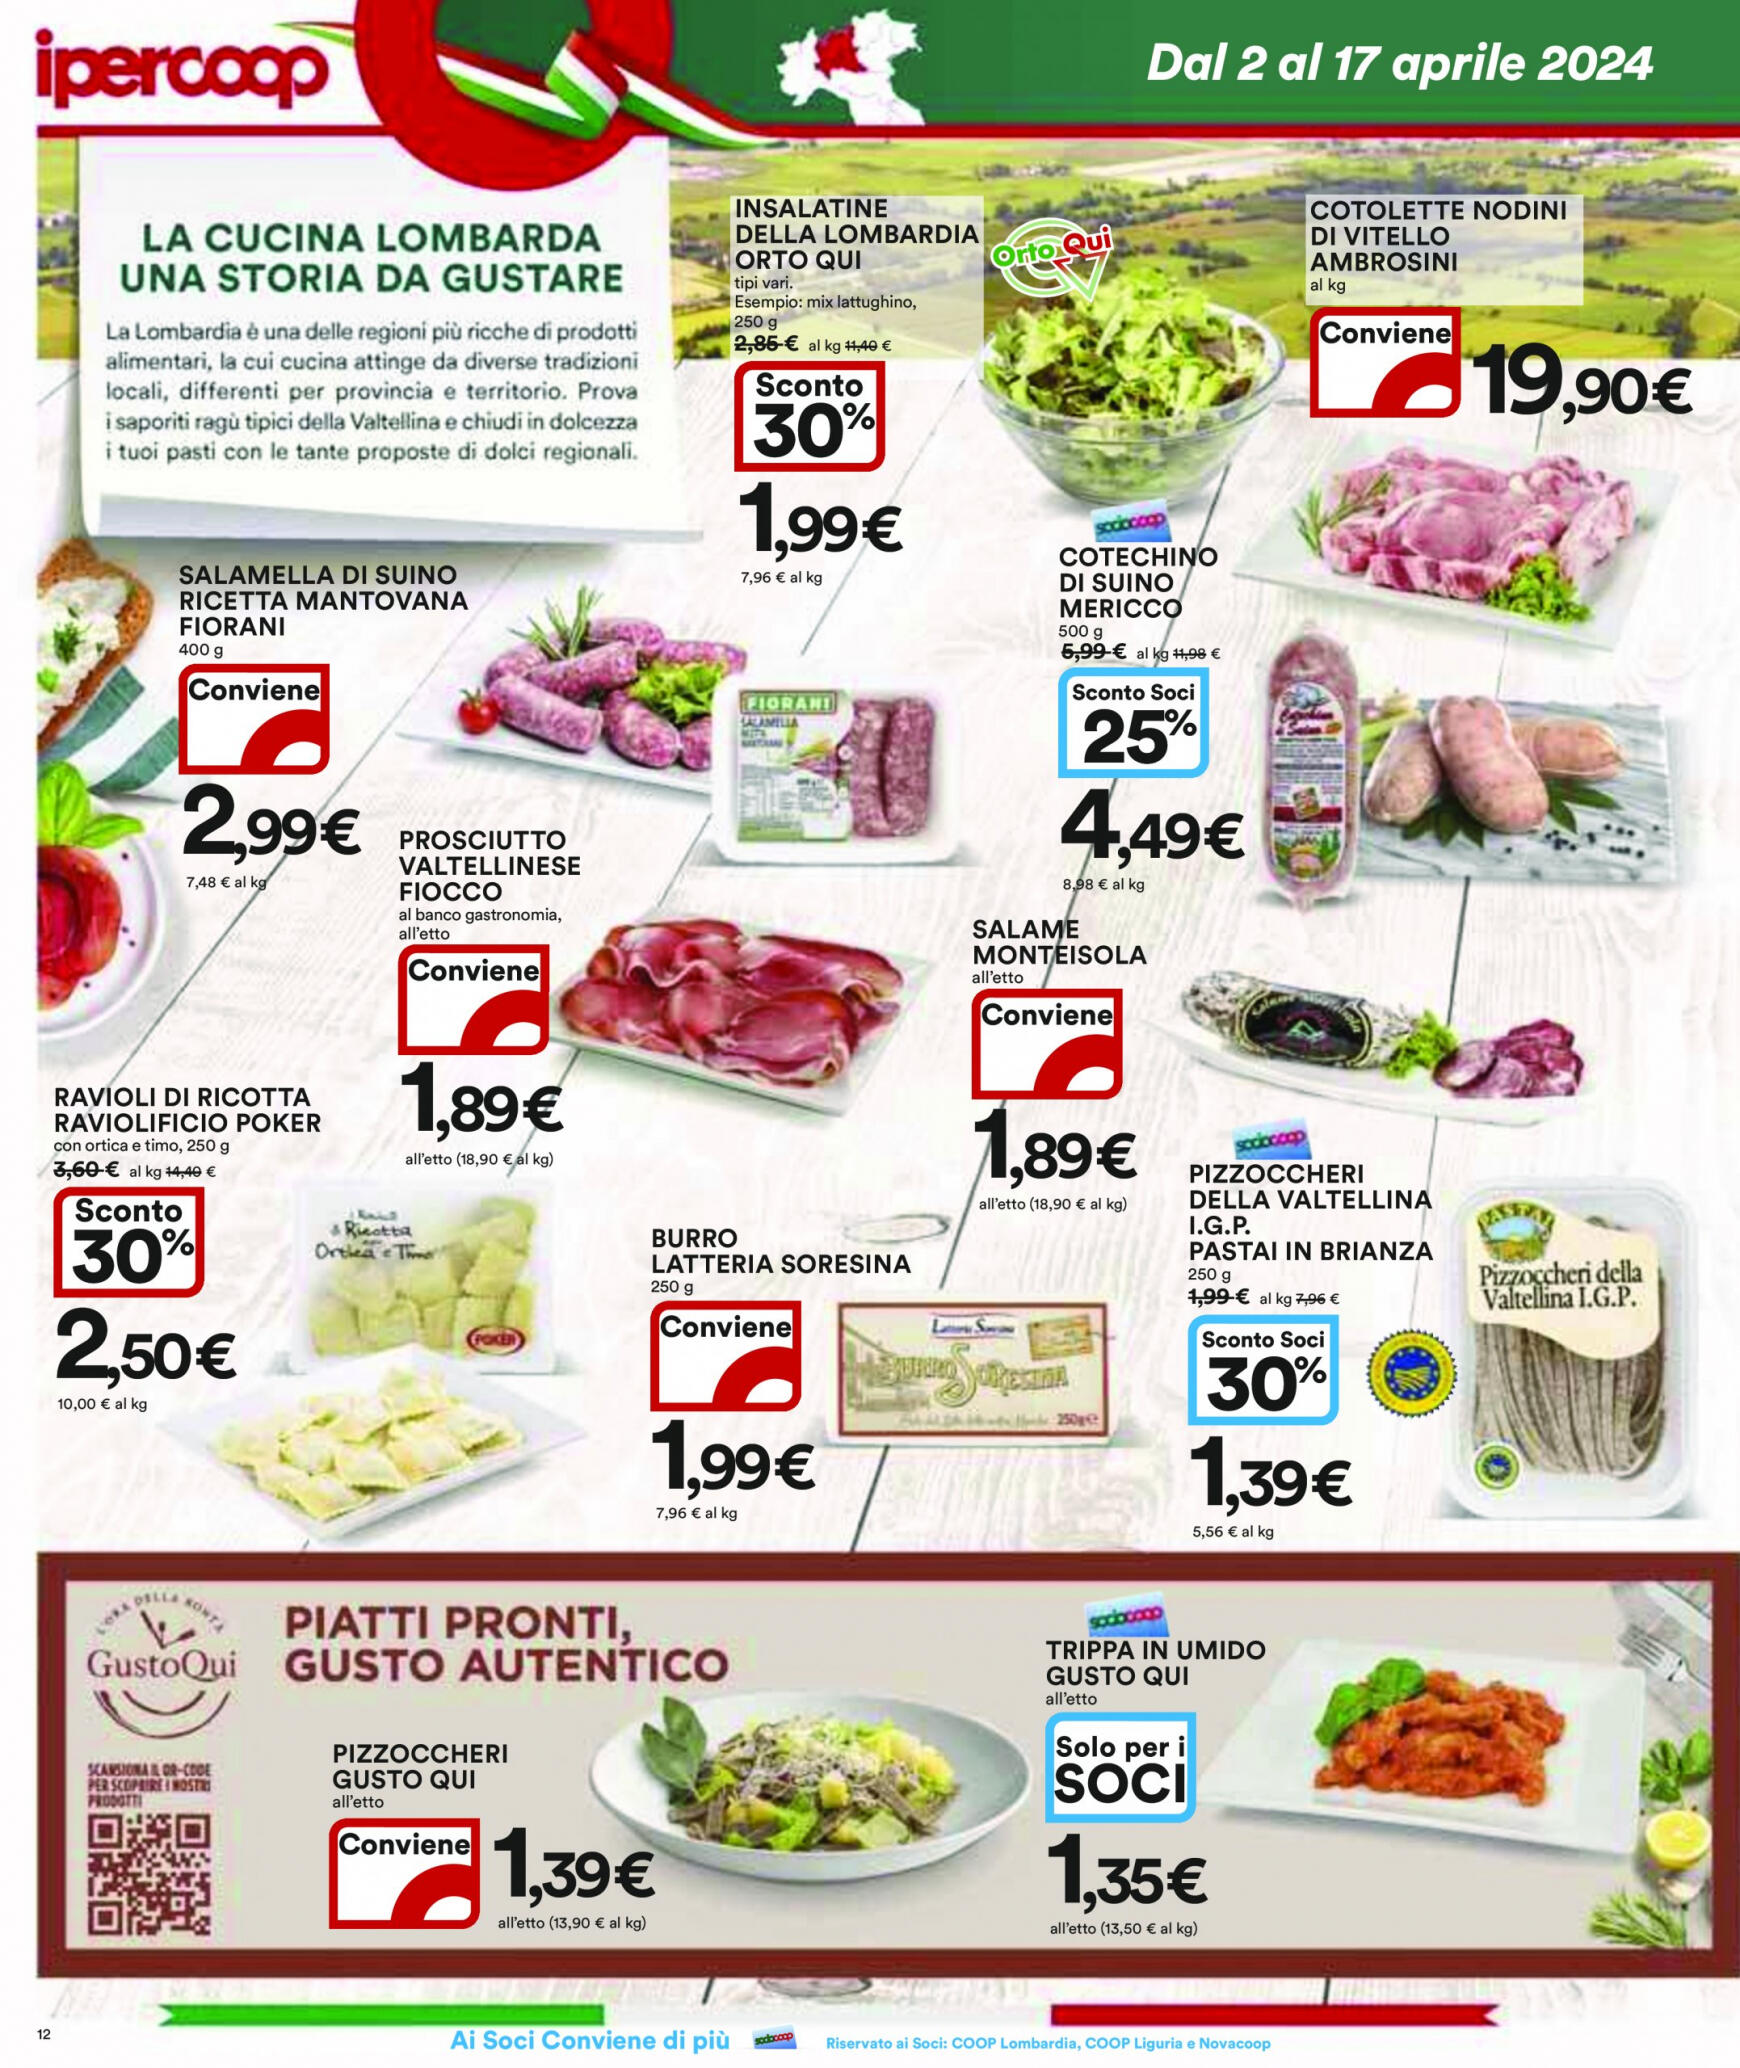 coop - Nuovo volantino Coop 02.04. - 17.04. - page: 12